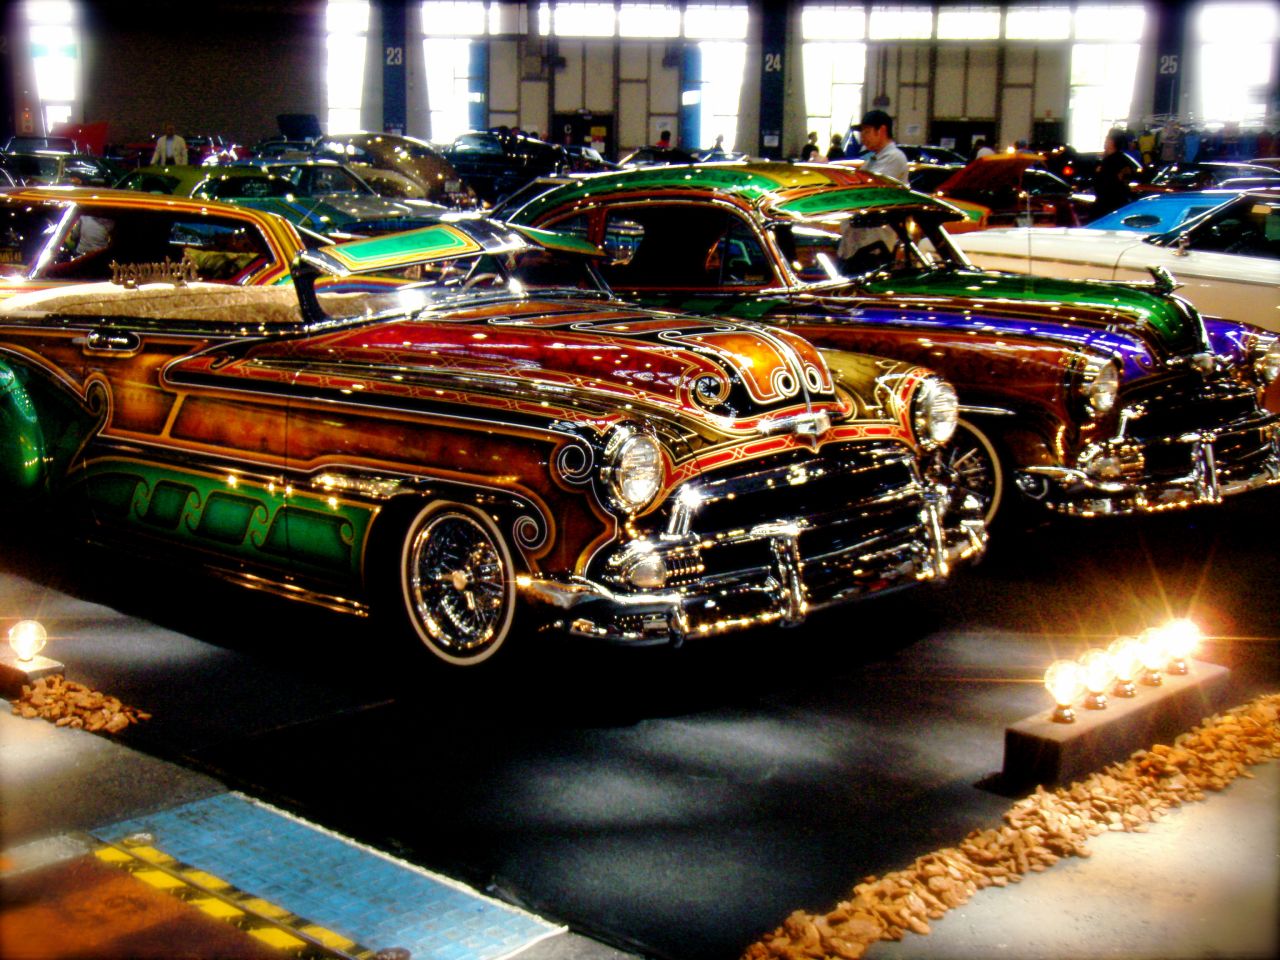 Show time. A lowrider convention in Japan.